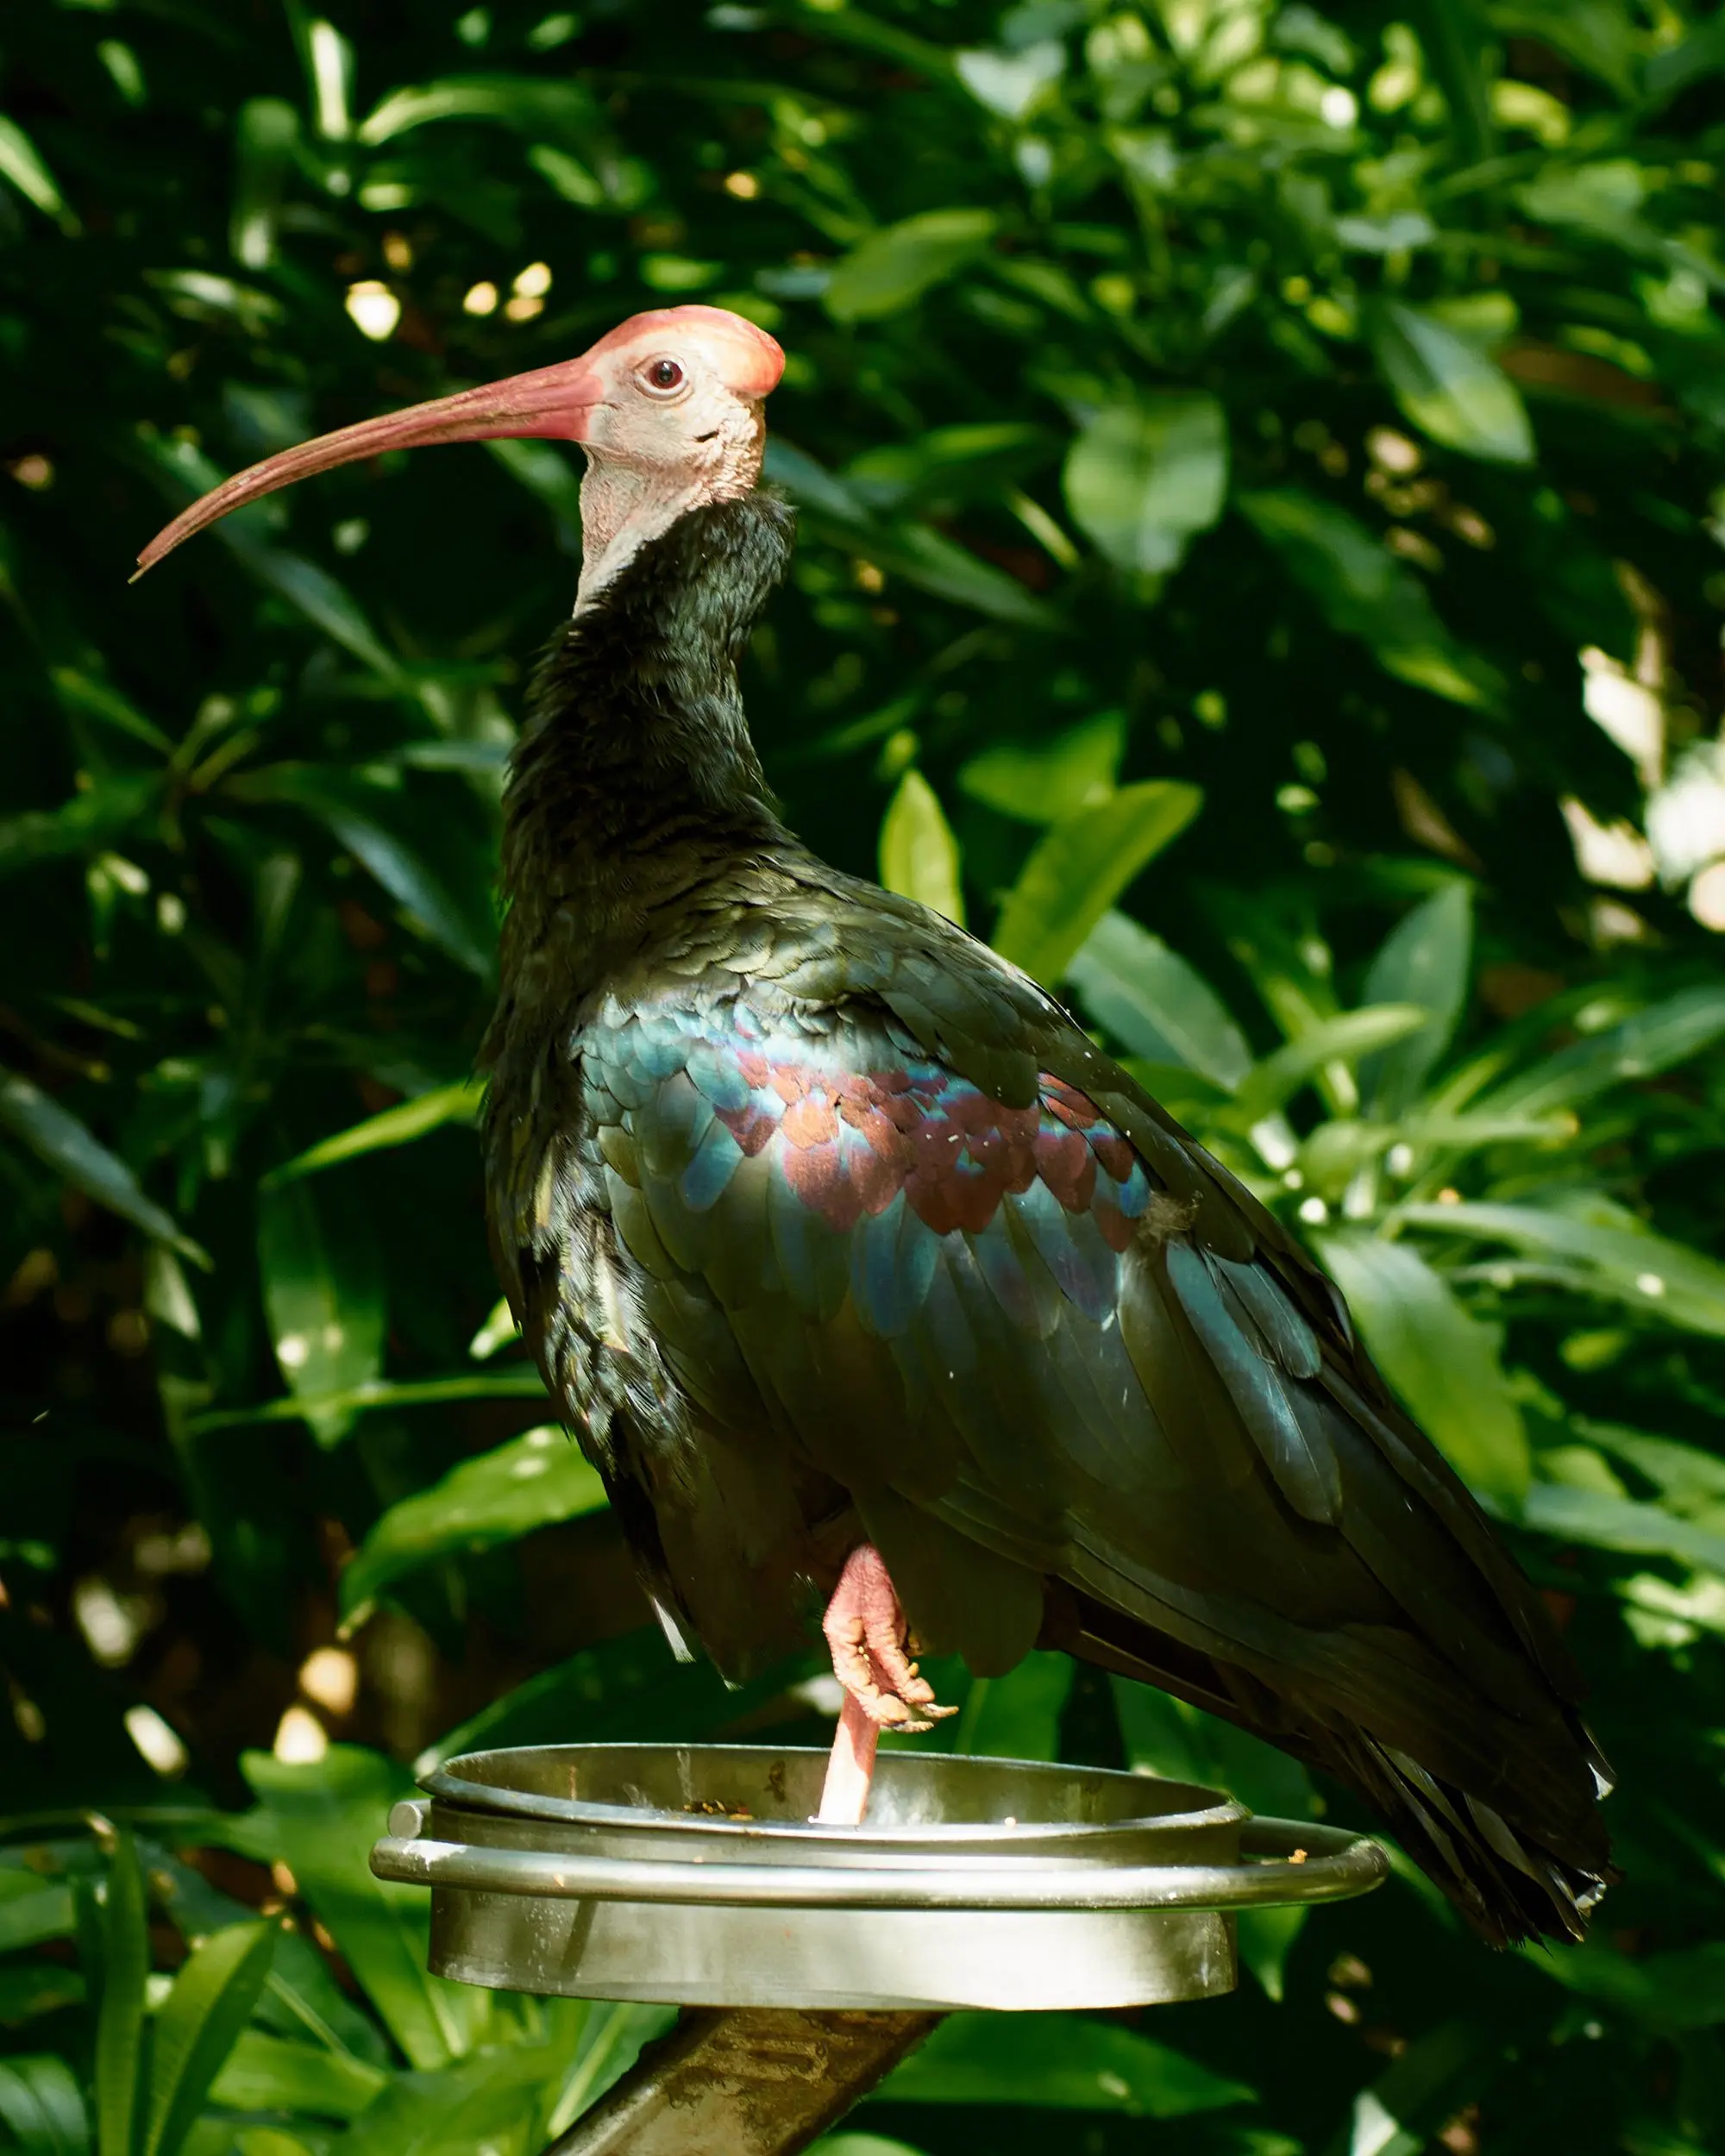 An ibis stands on a metal tray in front of verdant foliage.